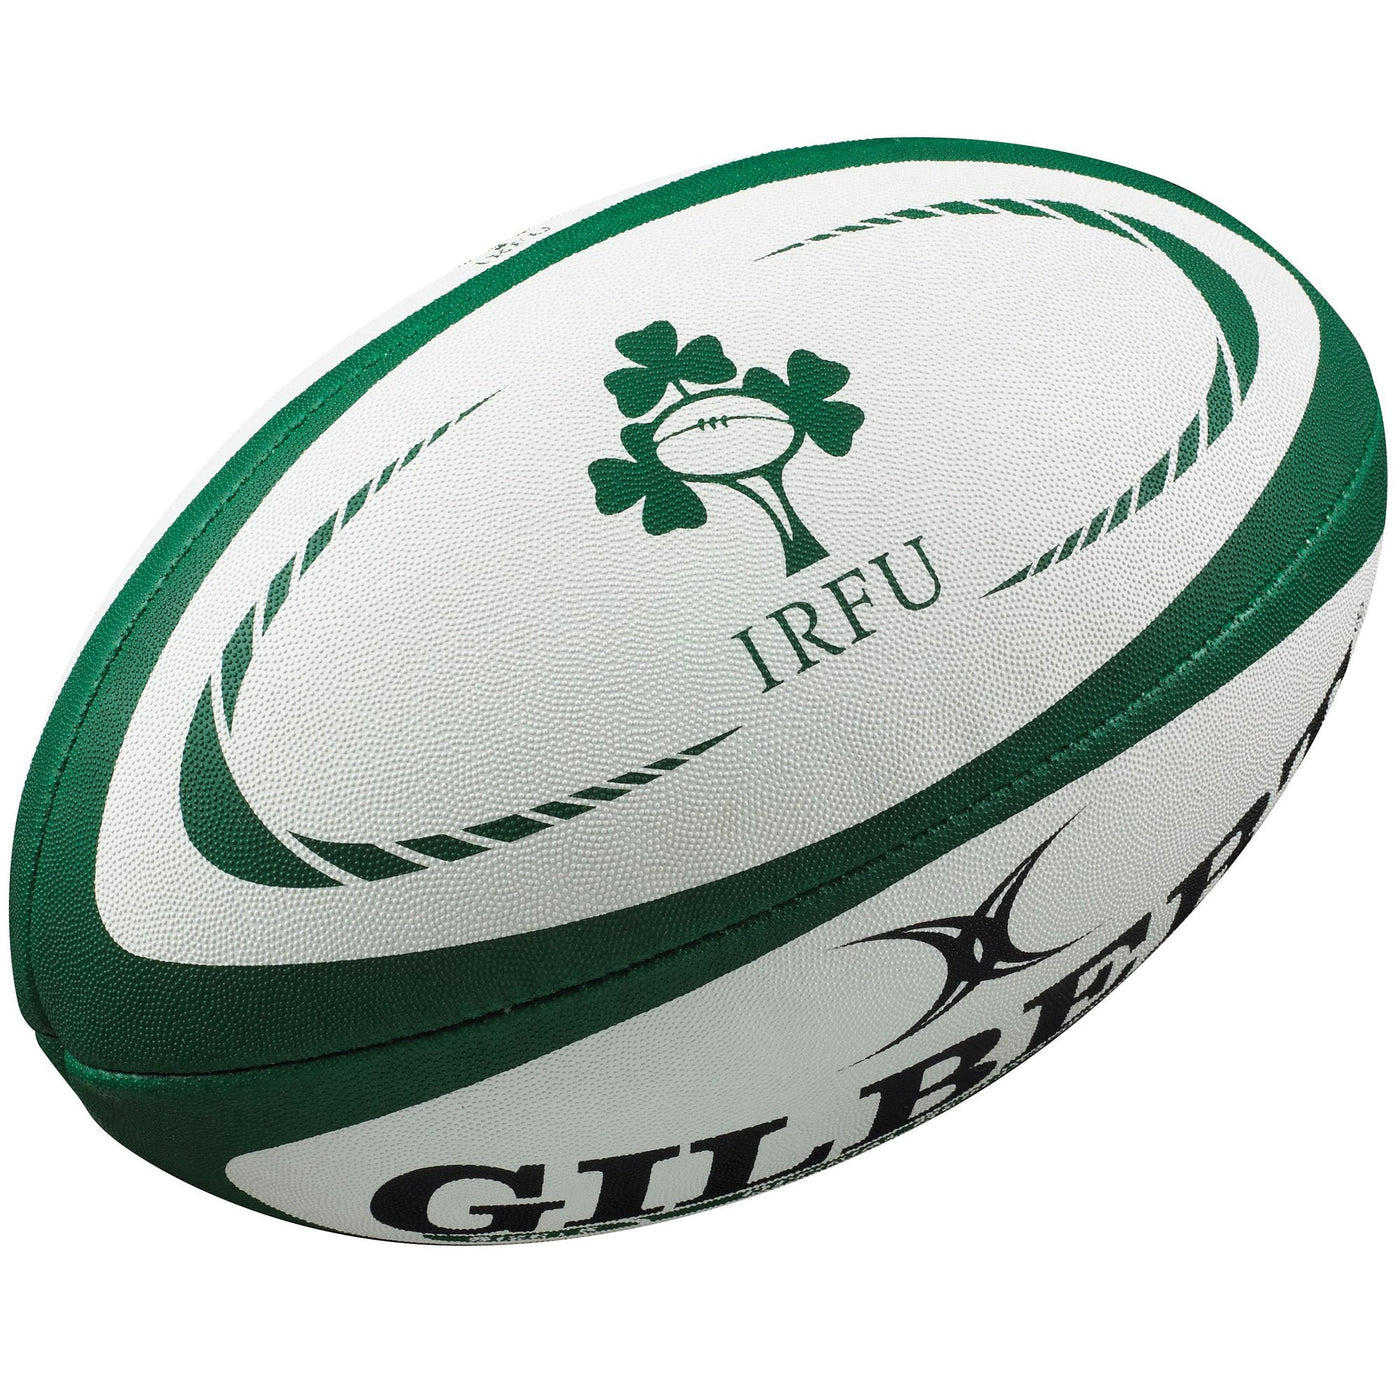 Ireland Replica Rugby Ball Size 5